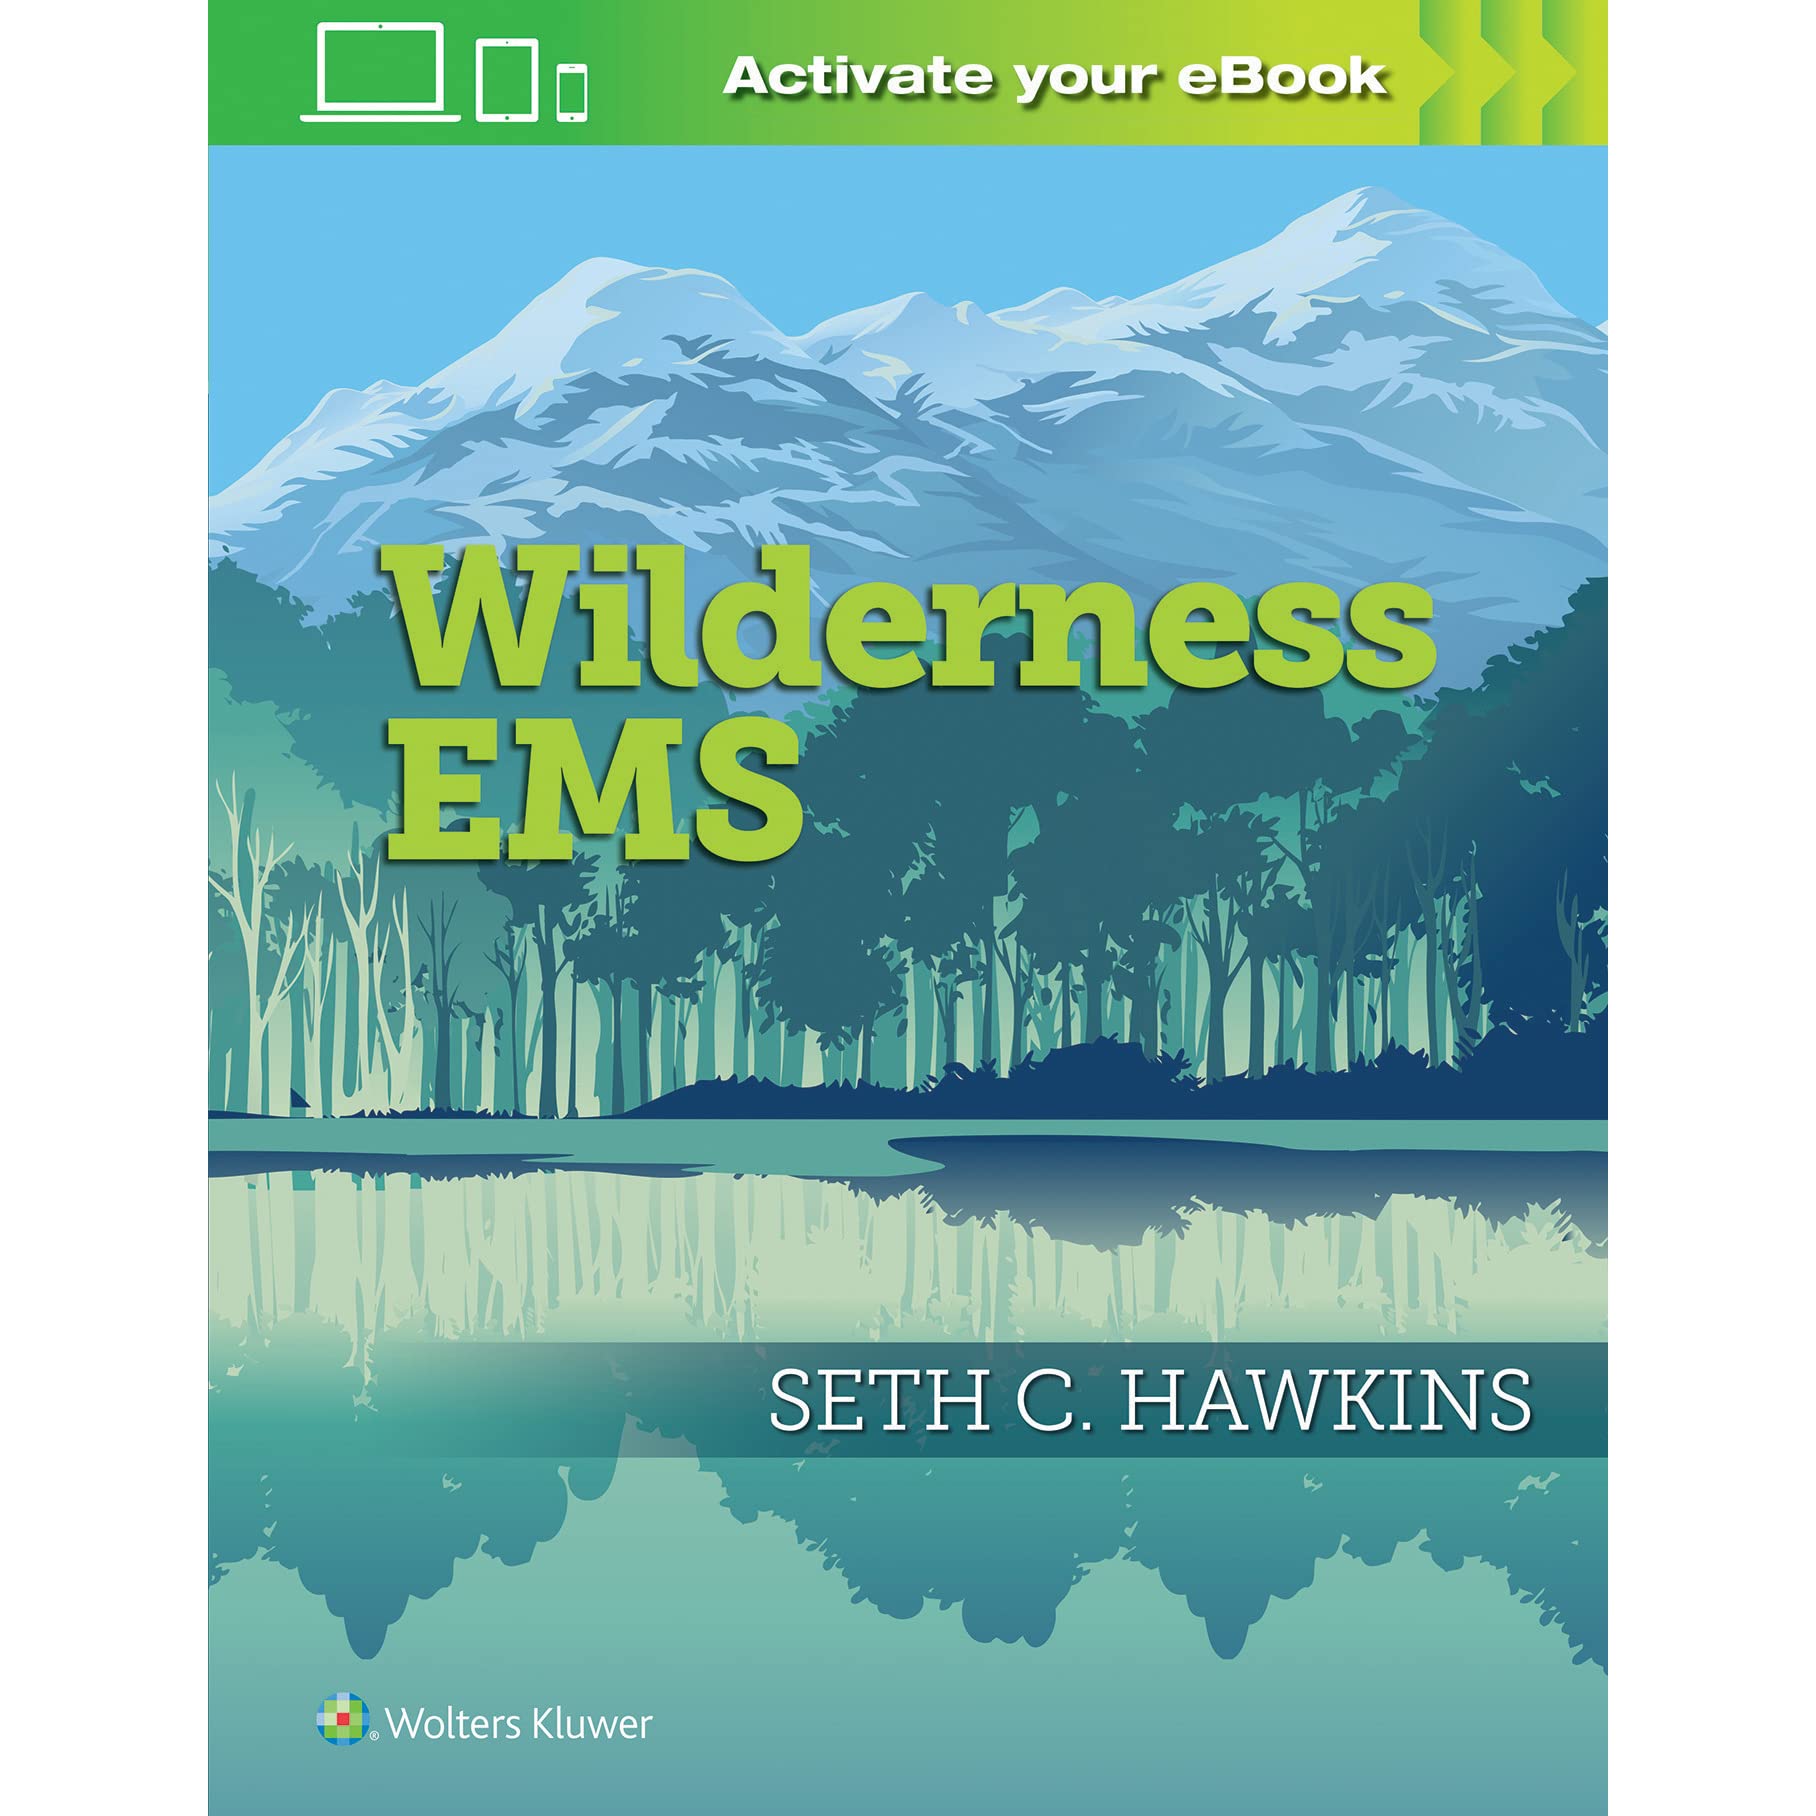 Image of "Wilderness EMS" Book